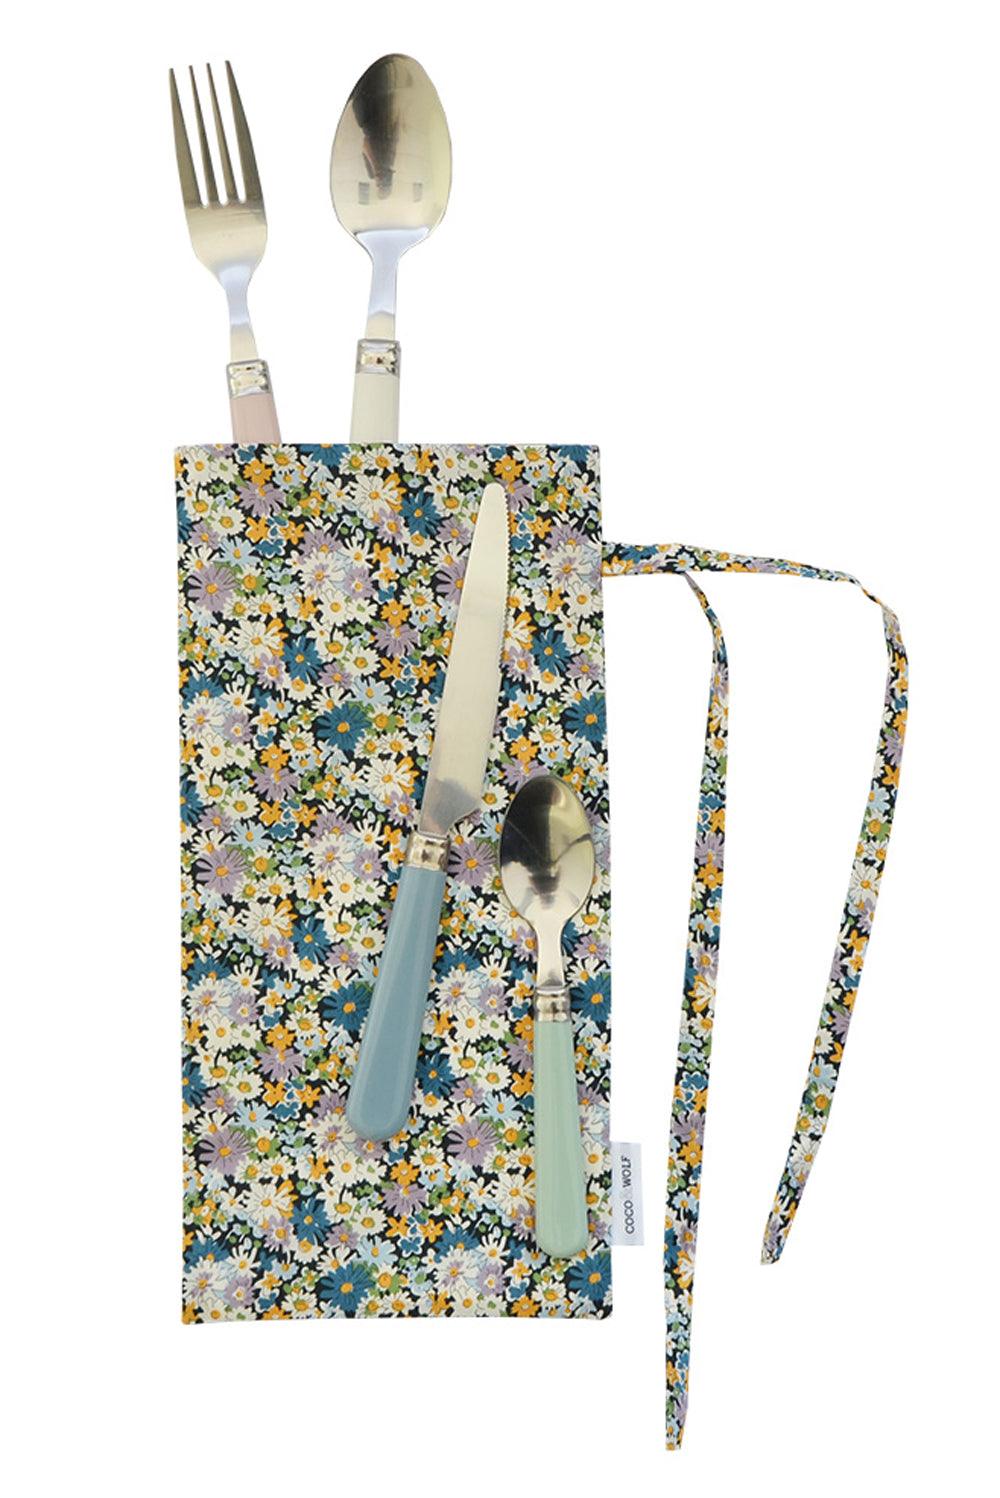 Cutlery Bag made with Liberty Fabric LIBBY - Coco & Wolf